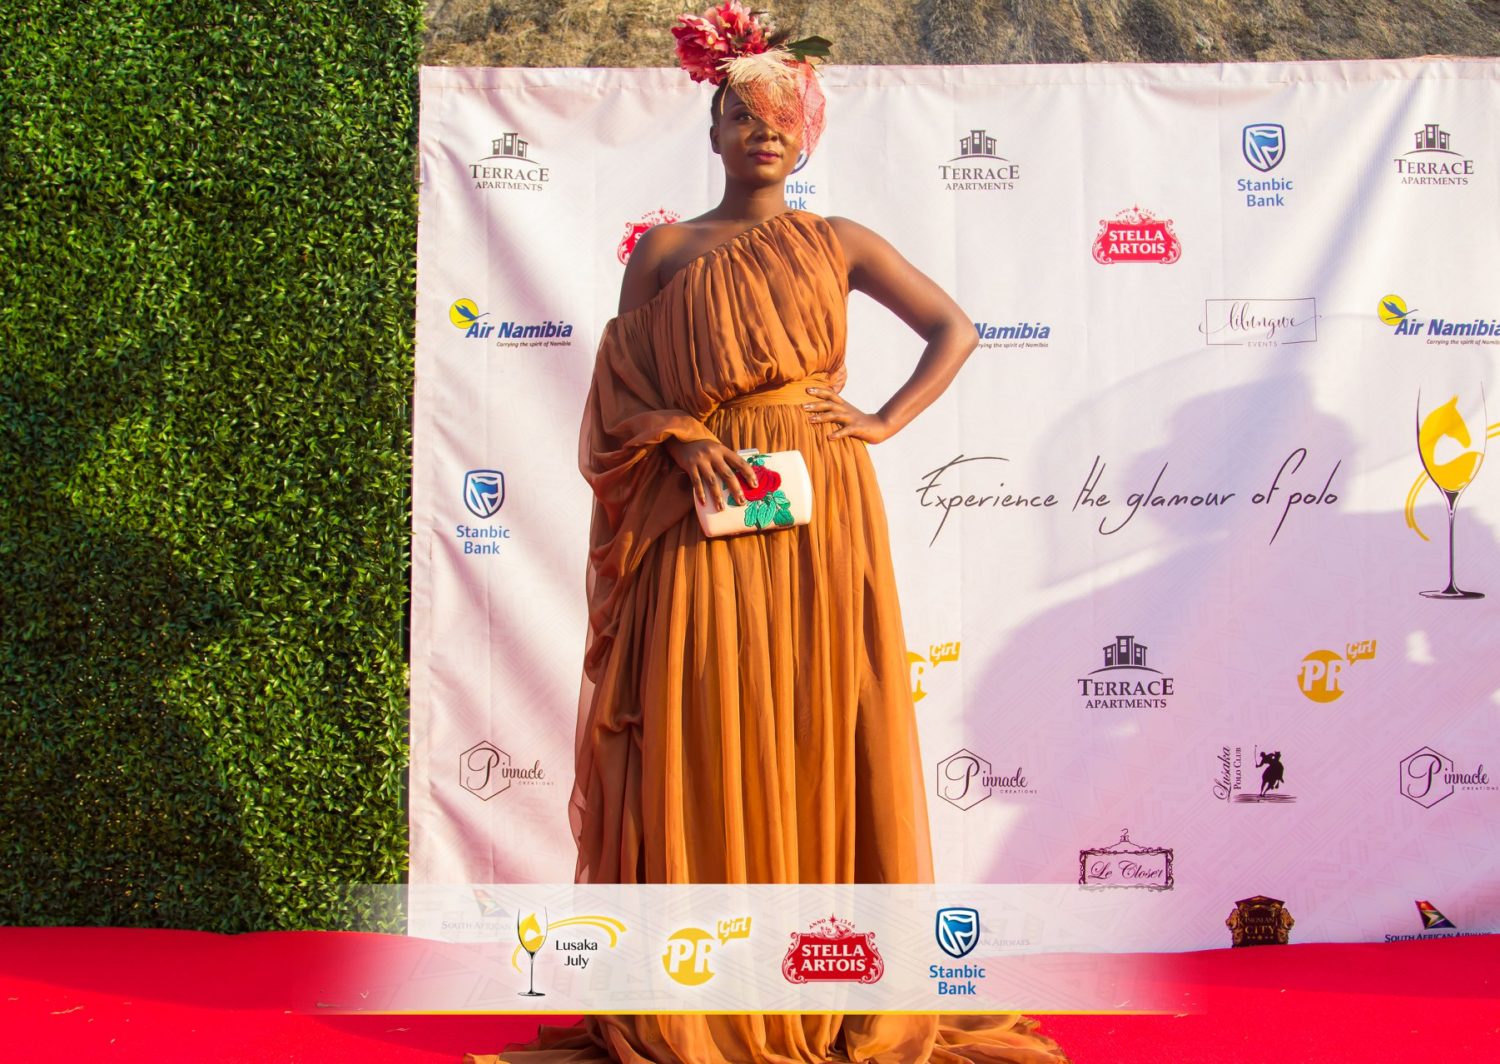 In Zambia, Ex Big Brother Africa Star Dillish Matthews, Maps Maponyane, and More Turn Out to Fete Third Annual Lusaka July